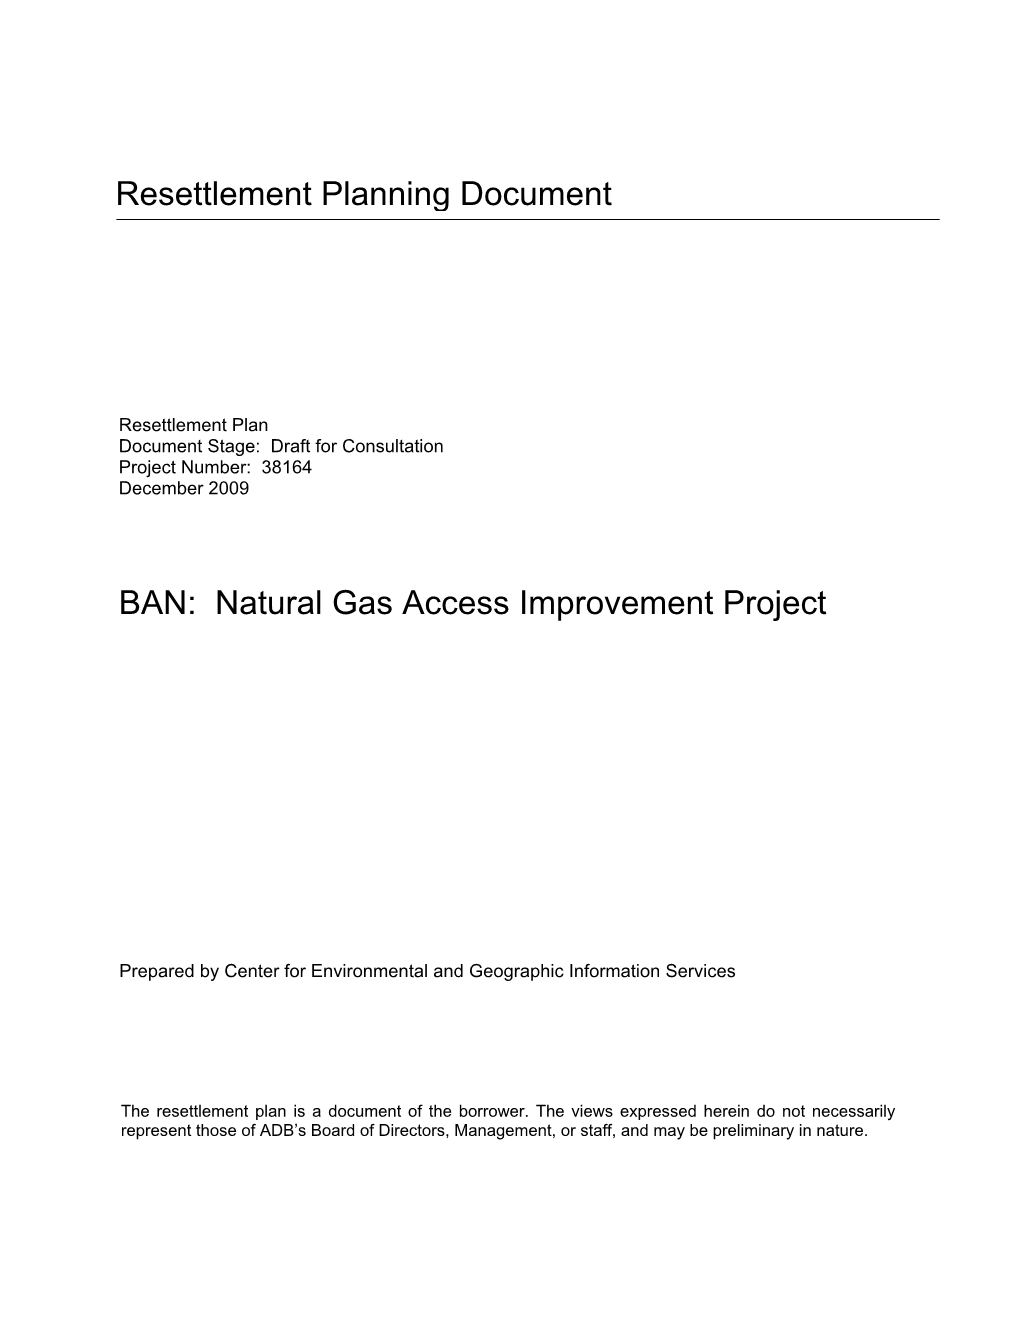 Natural Gas Access Improvement Project